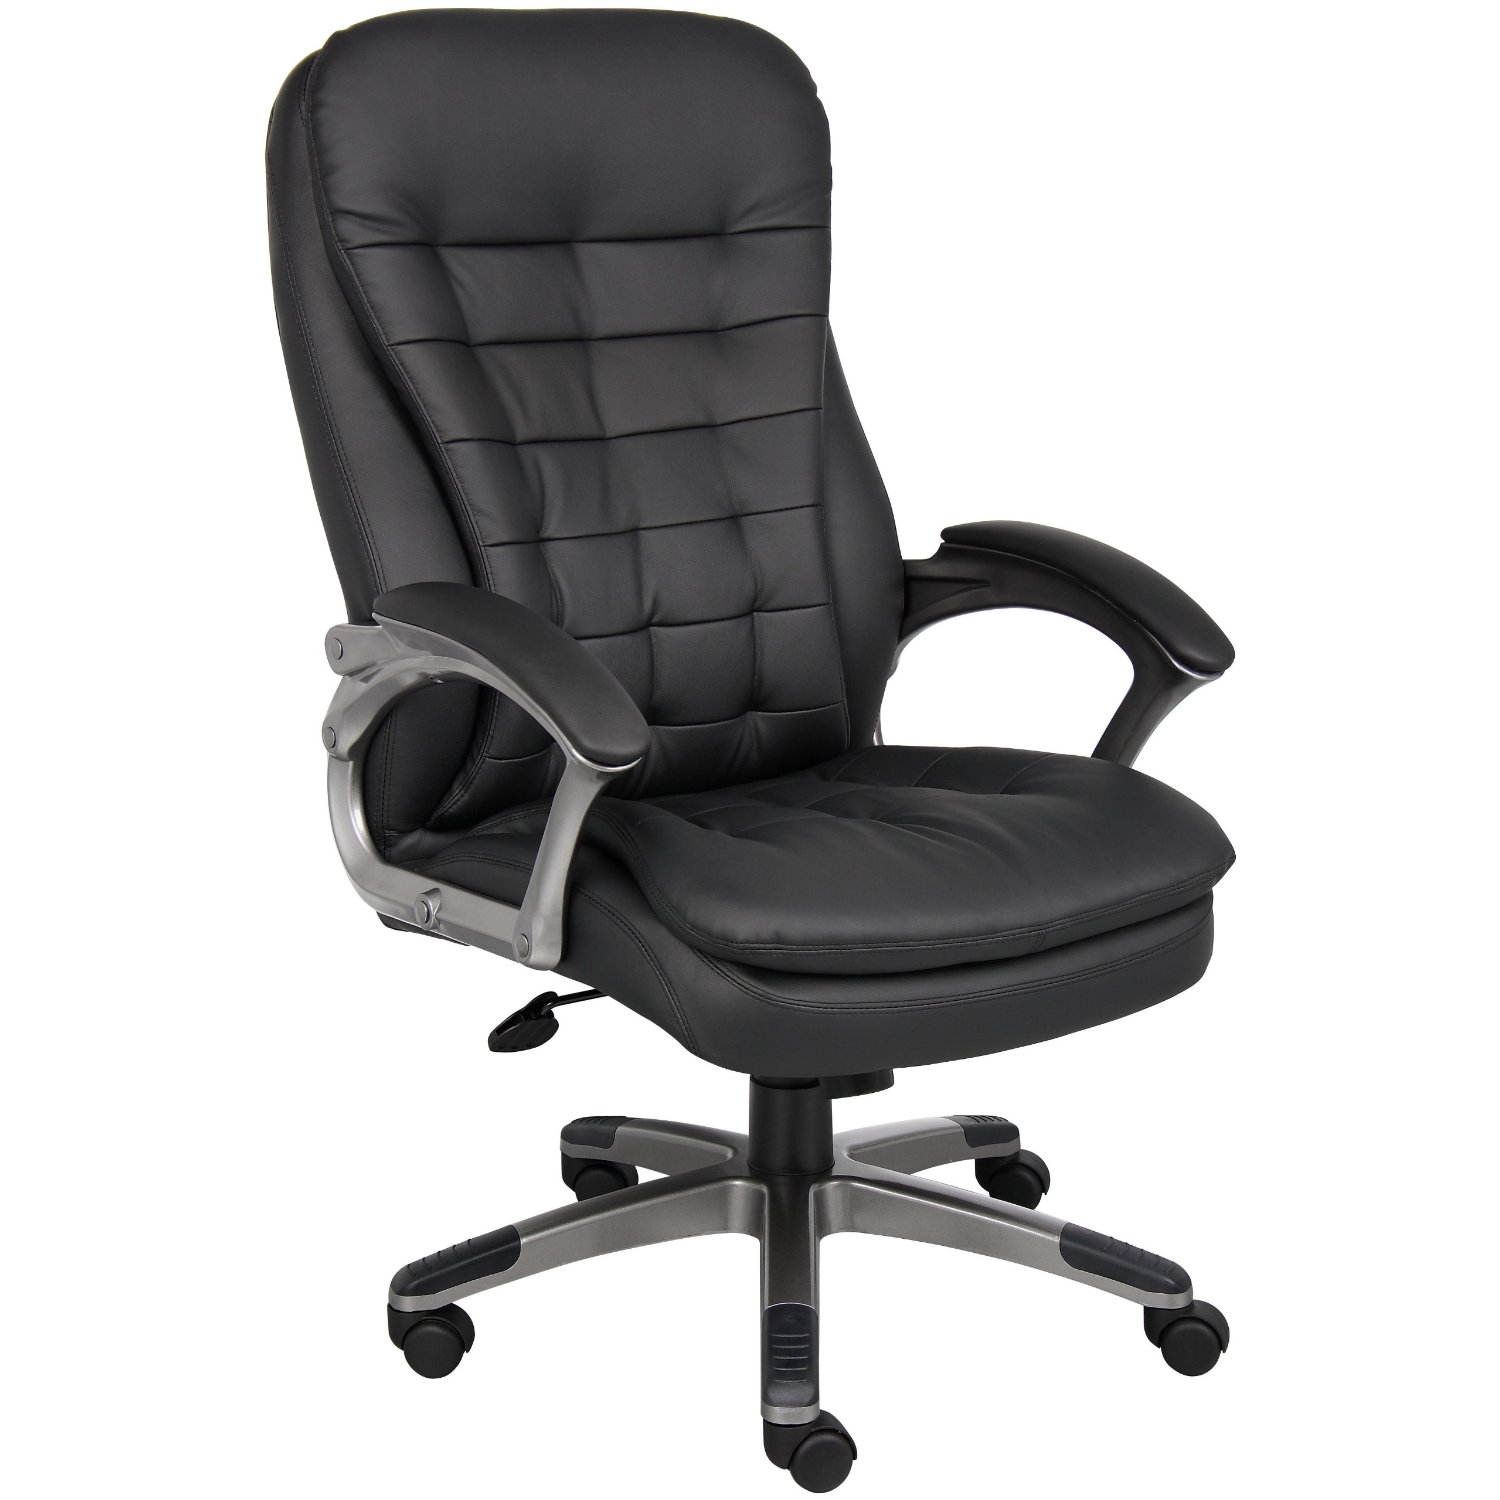 5 Best Executive Office Chairs - Your office is worth it - Tool Box